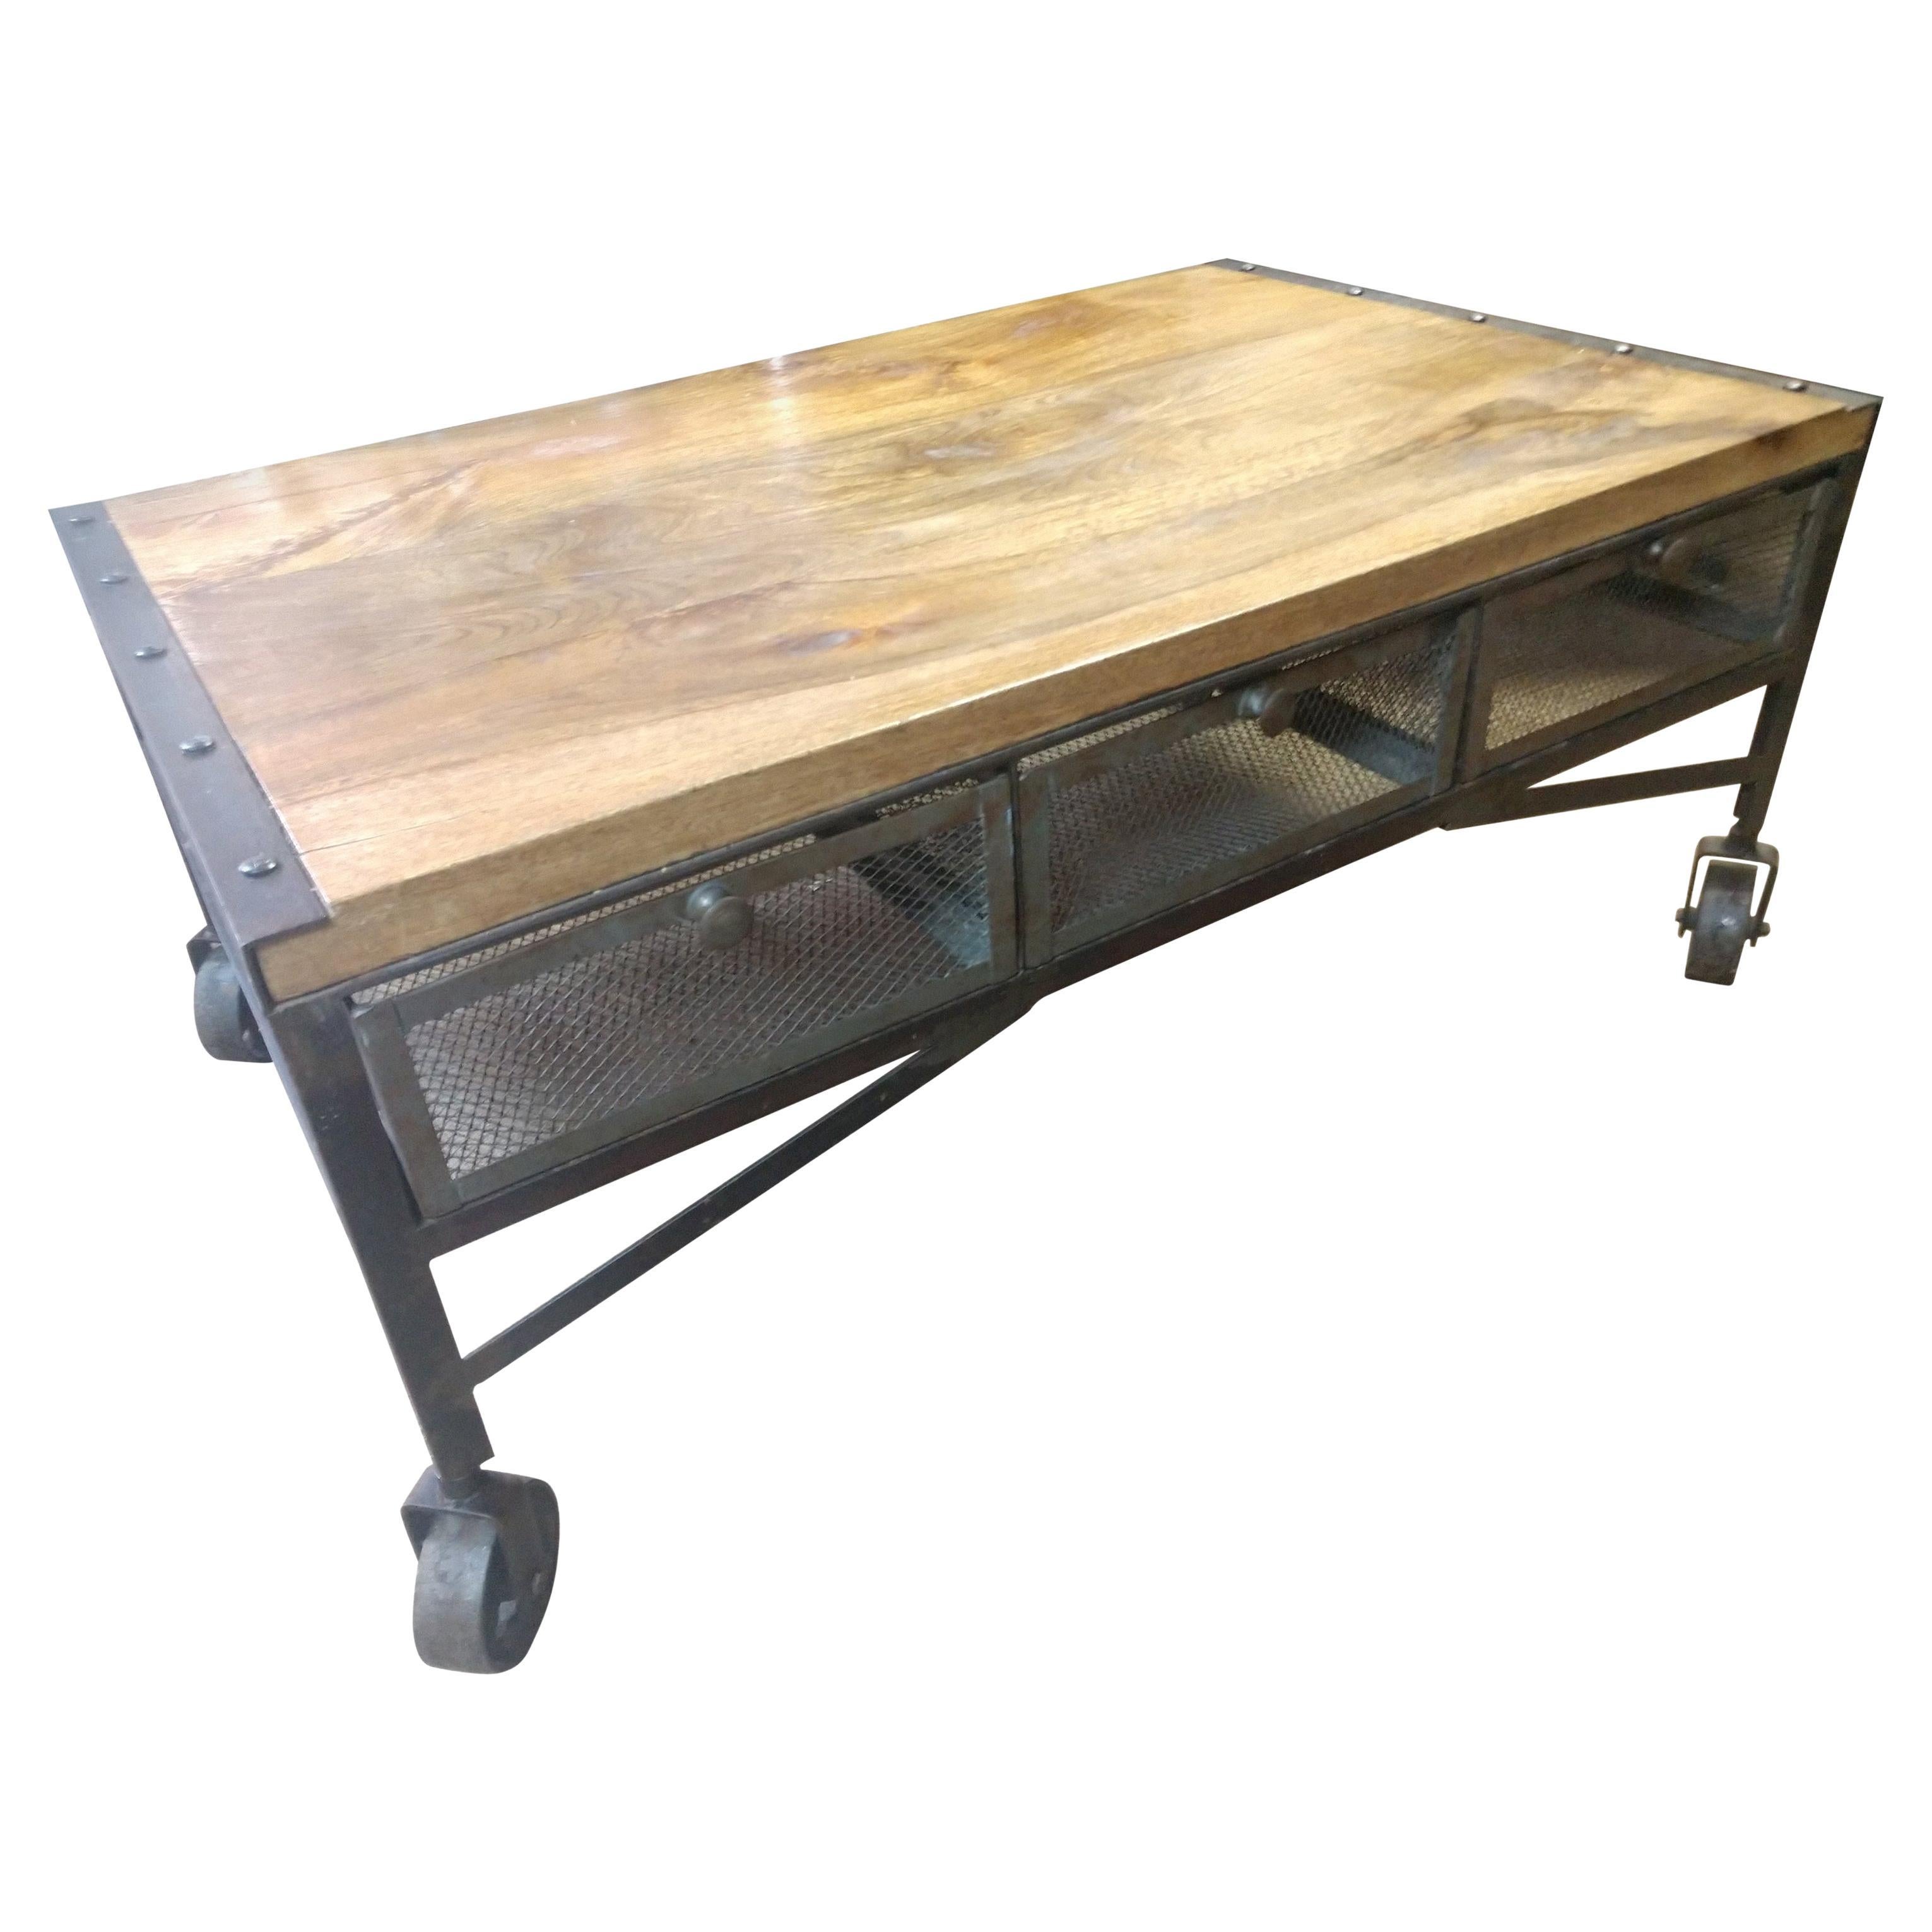 Iron Industrial Style Loading Dock Cart Cocktail Table Six Wire Basket Drawers For Sale